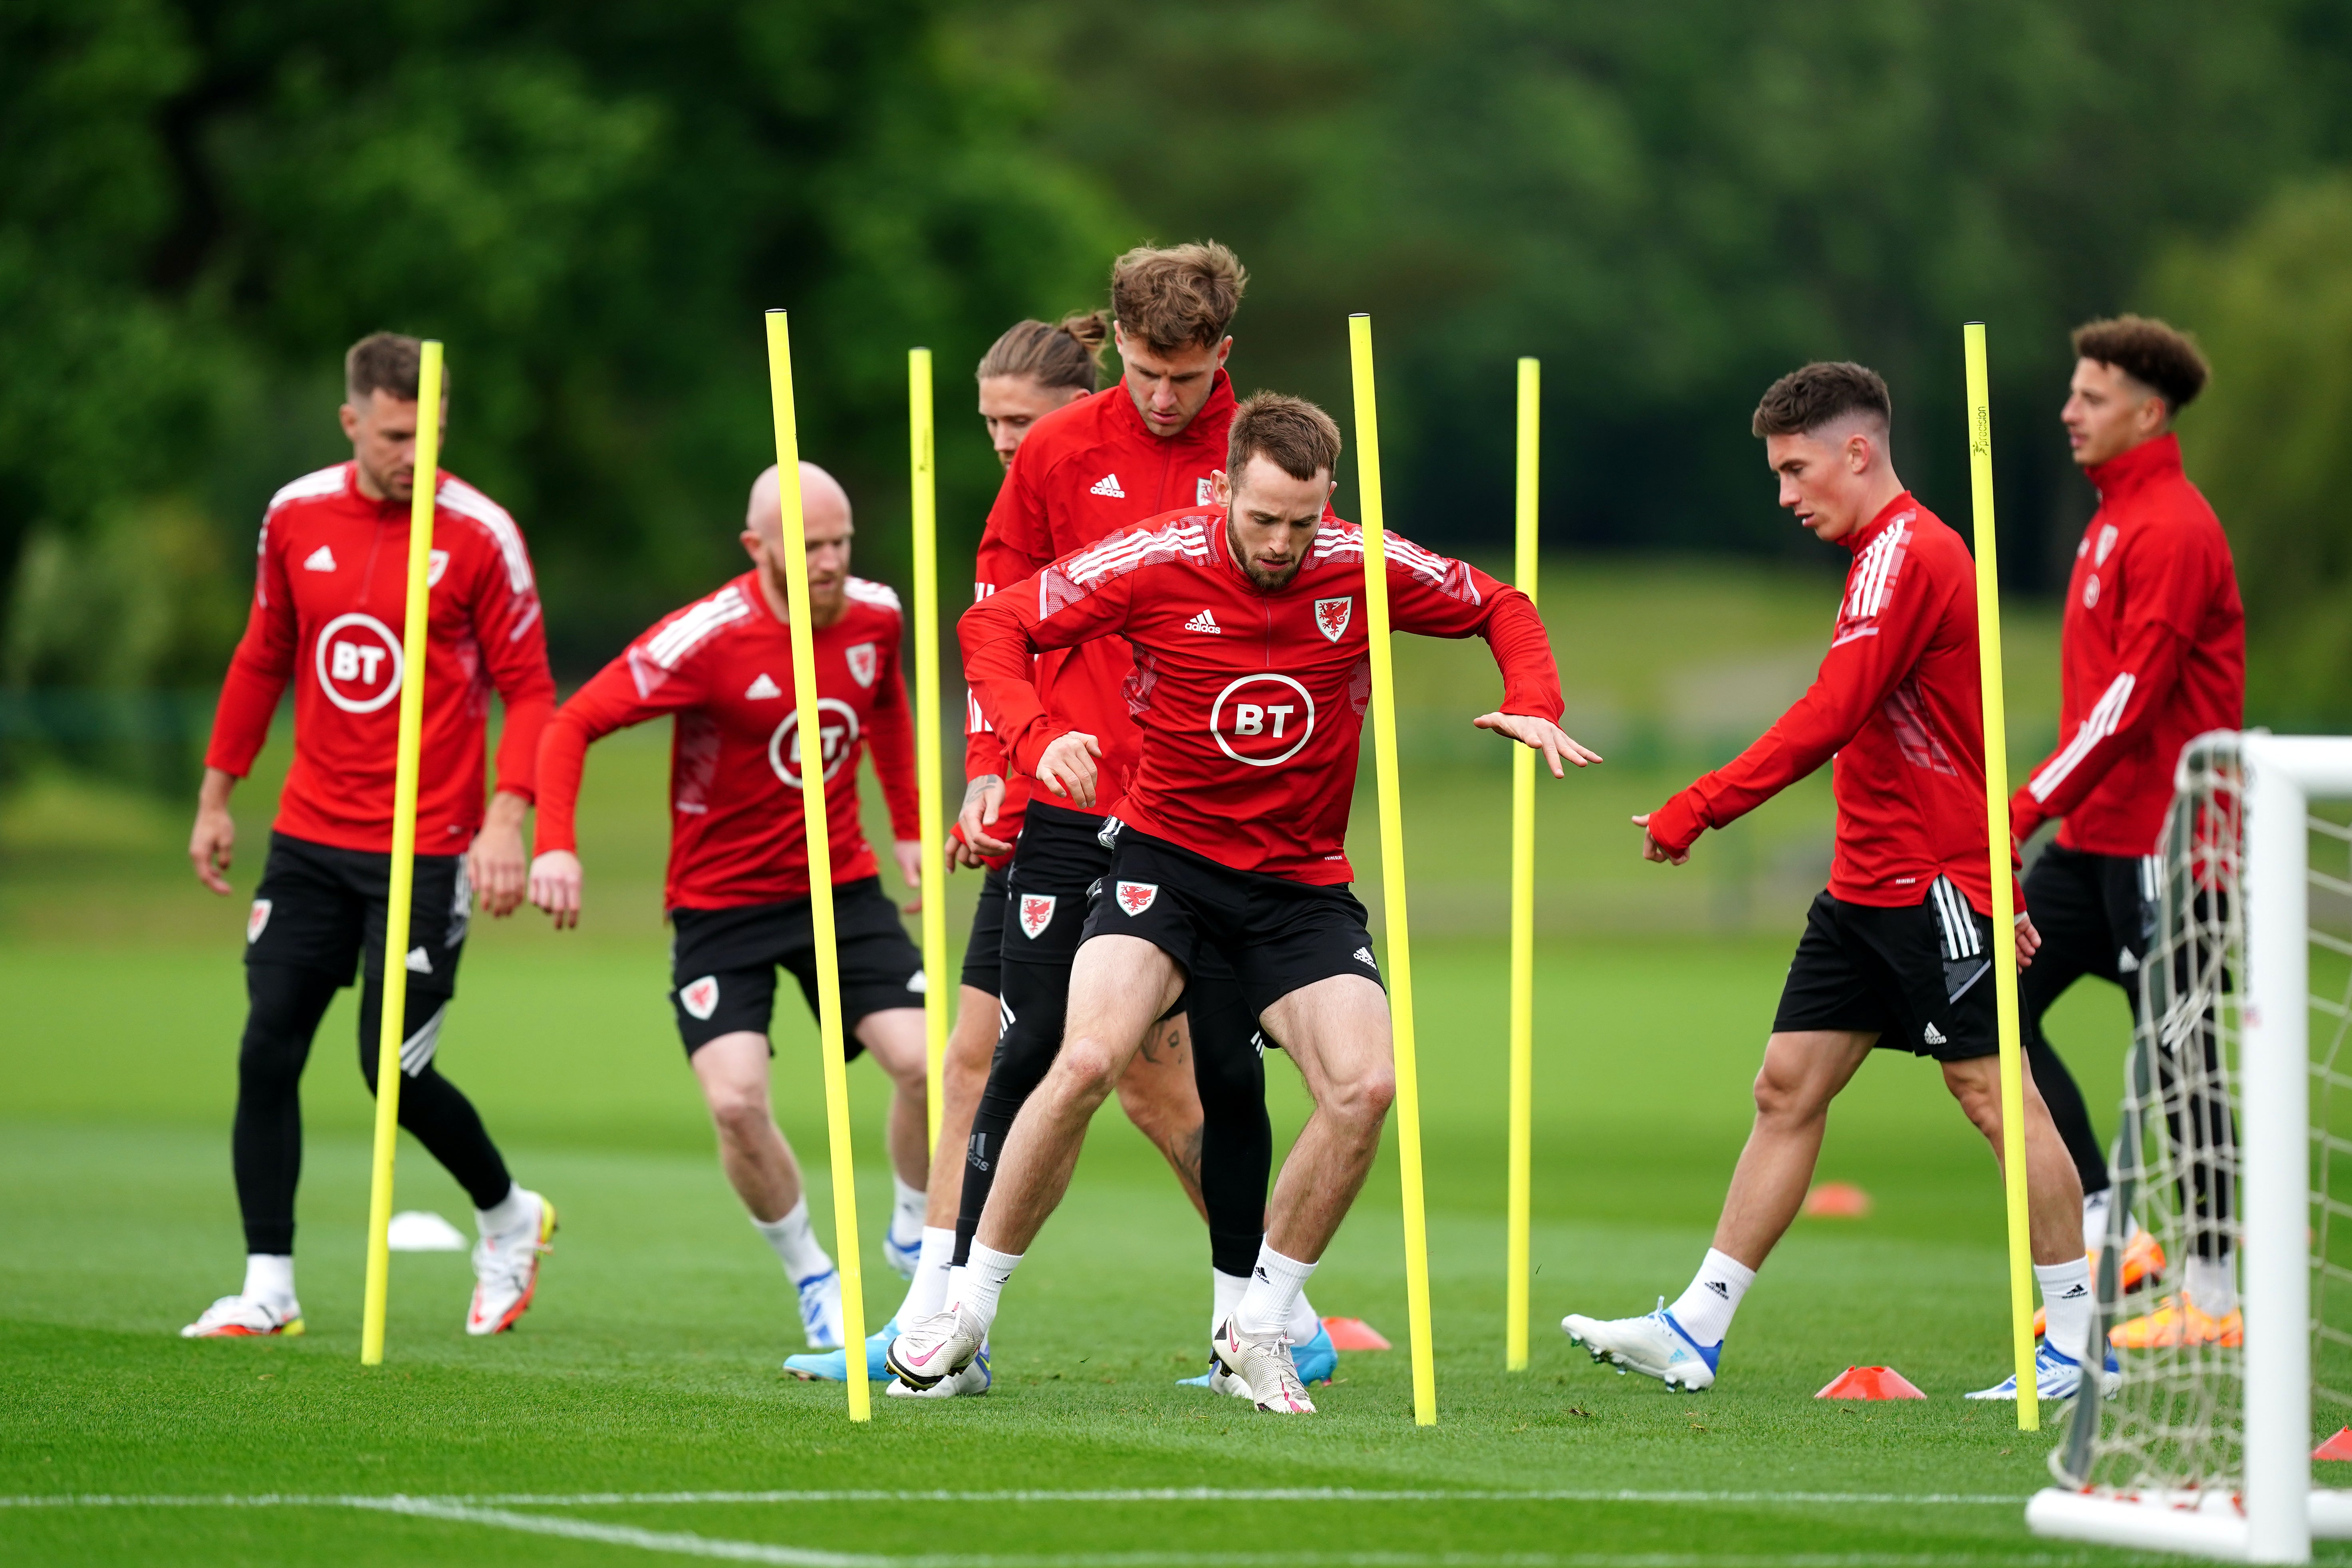 Wales will take Italy’s training base if they qualify for the World Cup (Mike Egerton/PA)